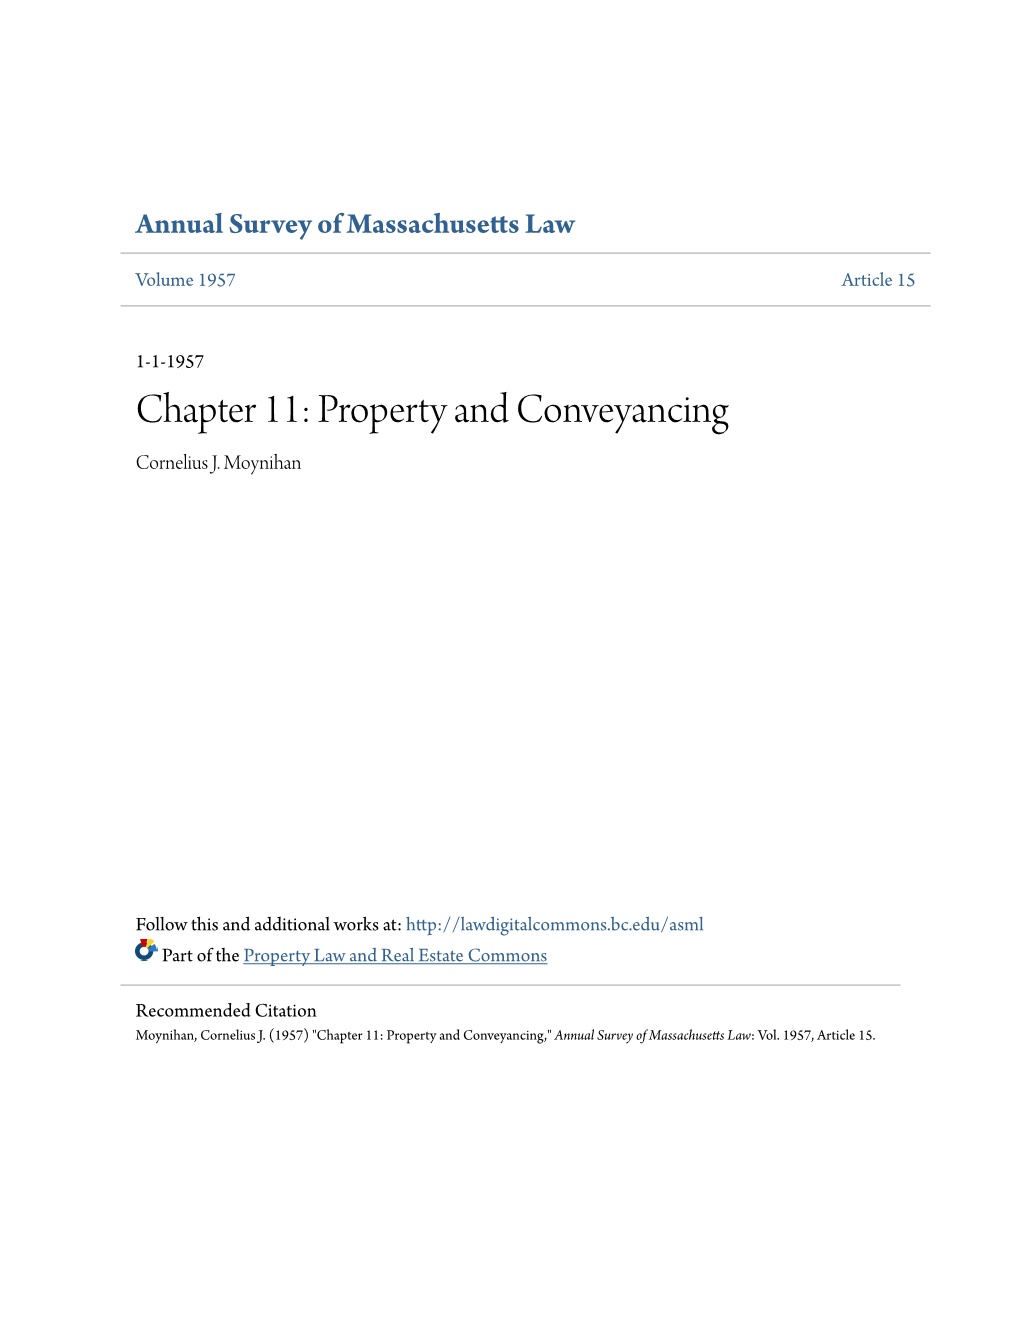 Chapter 11: Property and Conveyancing Cornelius J